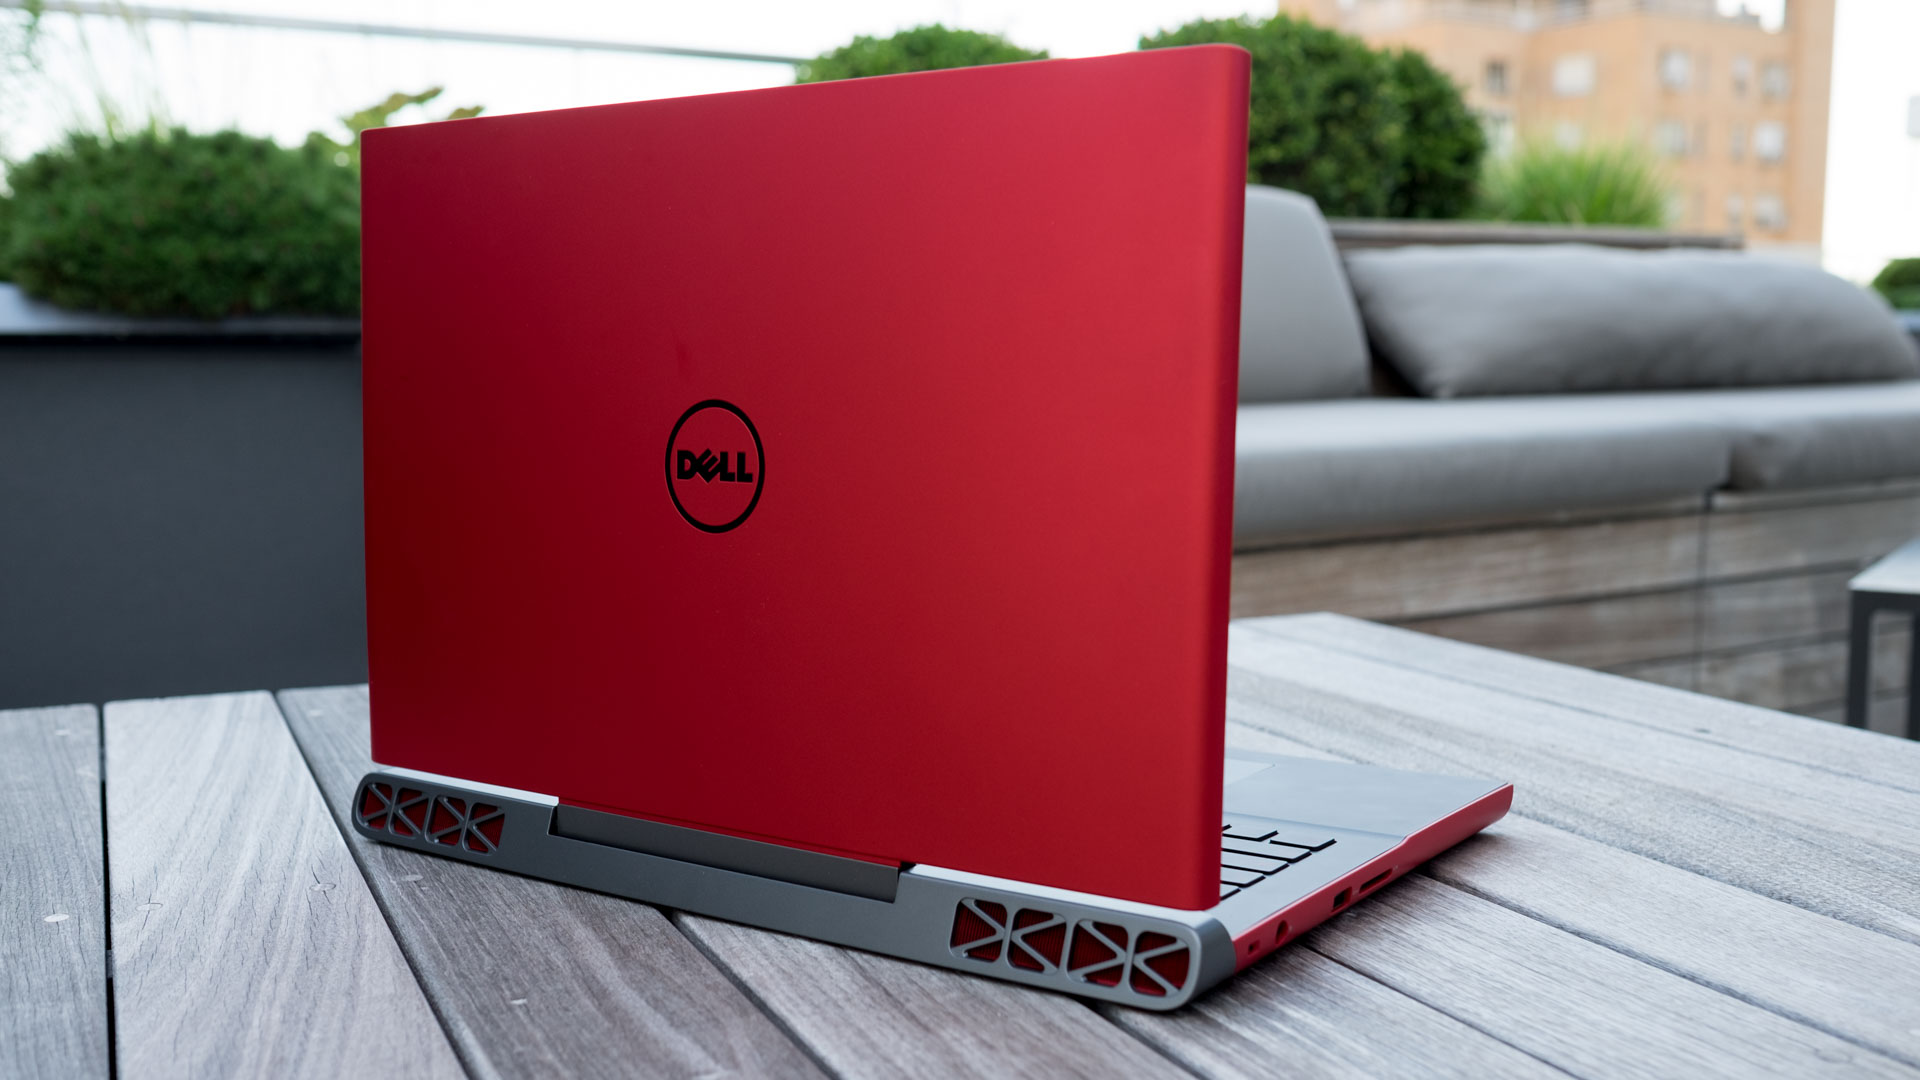 Dell takes aim at gamers on a budget with a new Inspiron gaming laptop